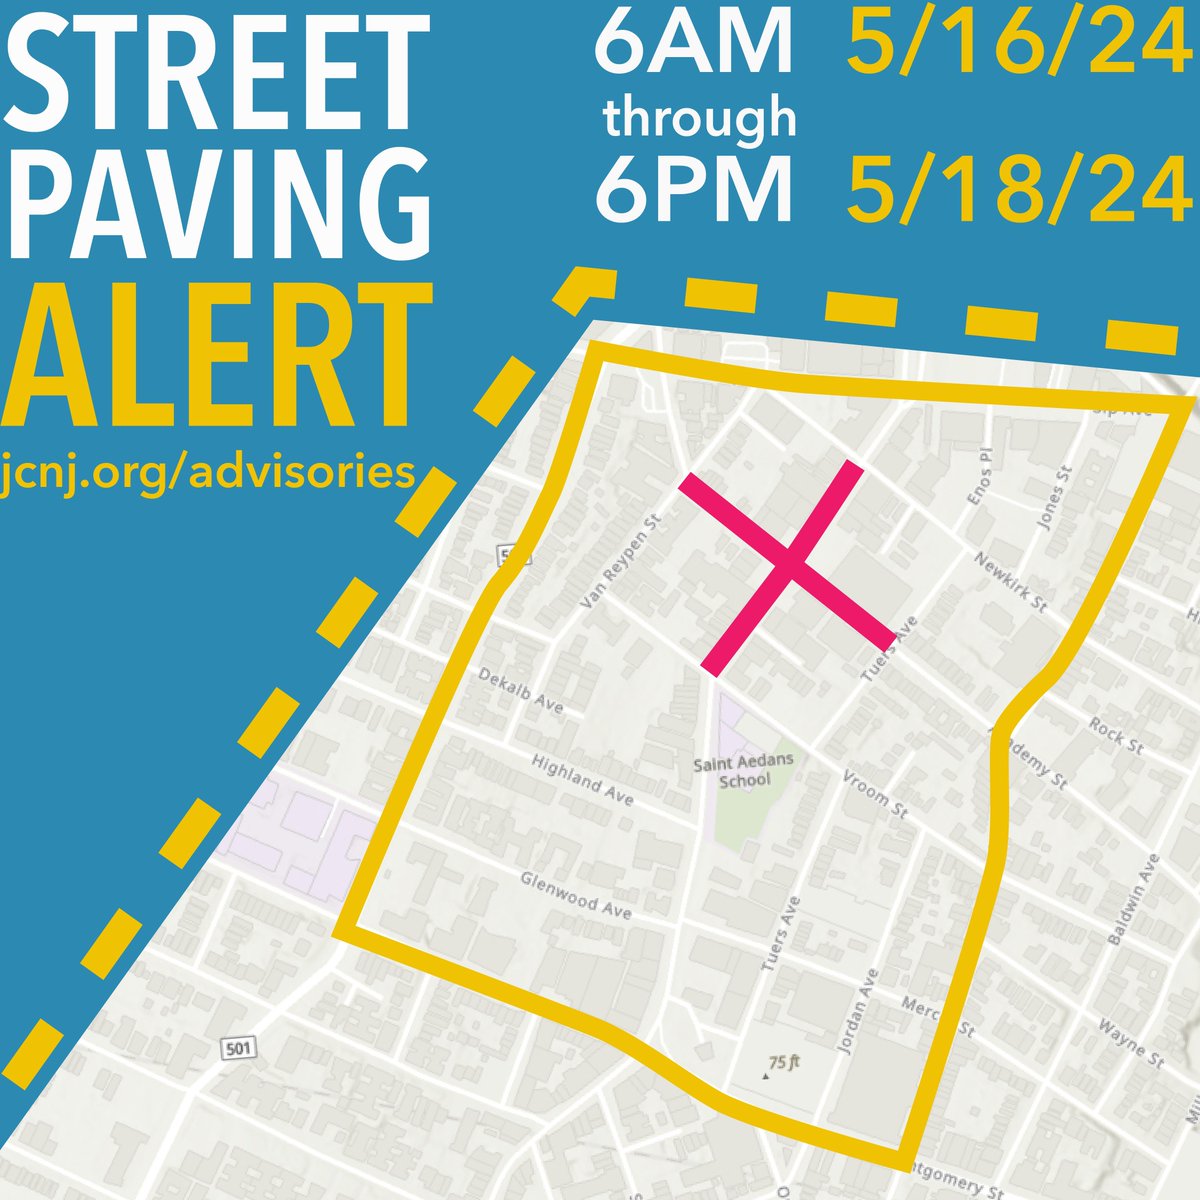 We are making Jersey City streets smoother! From 6AM Thurs, 5/16/24, to 6PM Sat, 5/18/24, we'll be closing streets from Montgomery to Sip and from JFK to Bergen. Please check jcnj.org/advisories. Only local traffic will have access. Please observe parking restrictions.